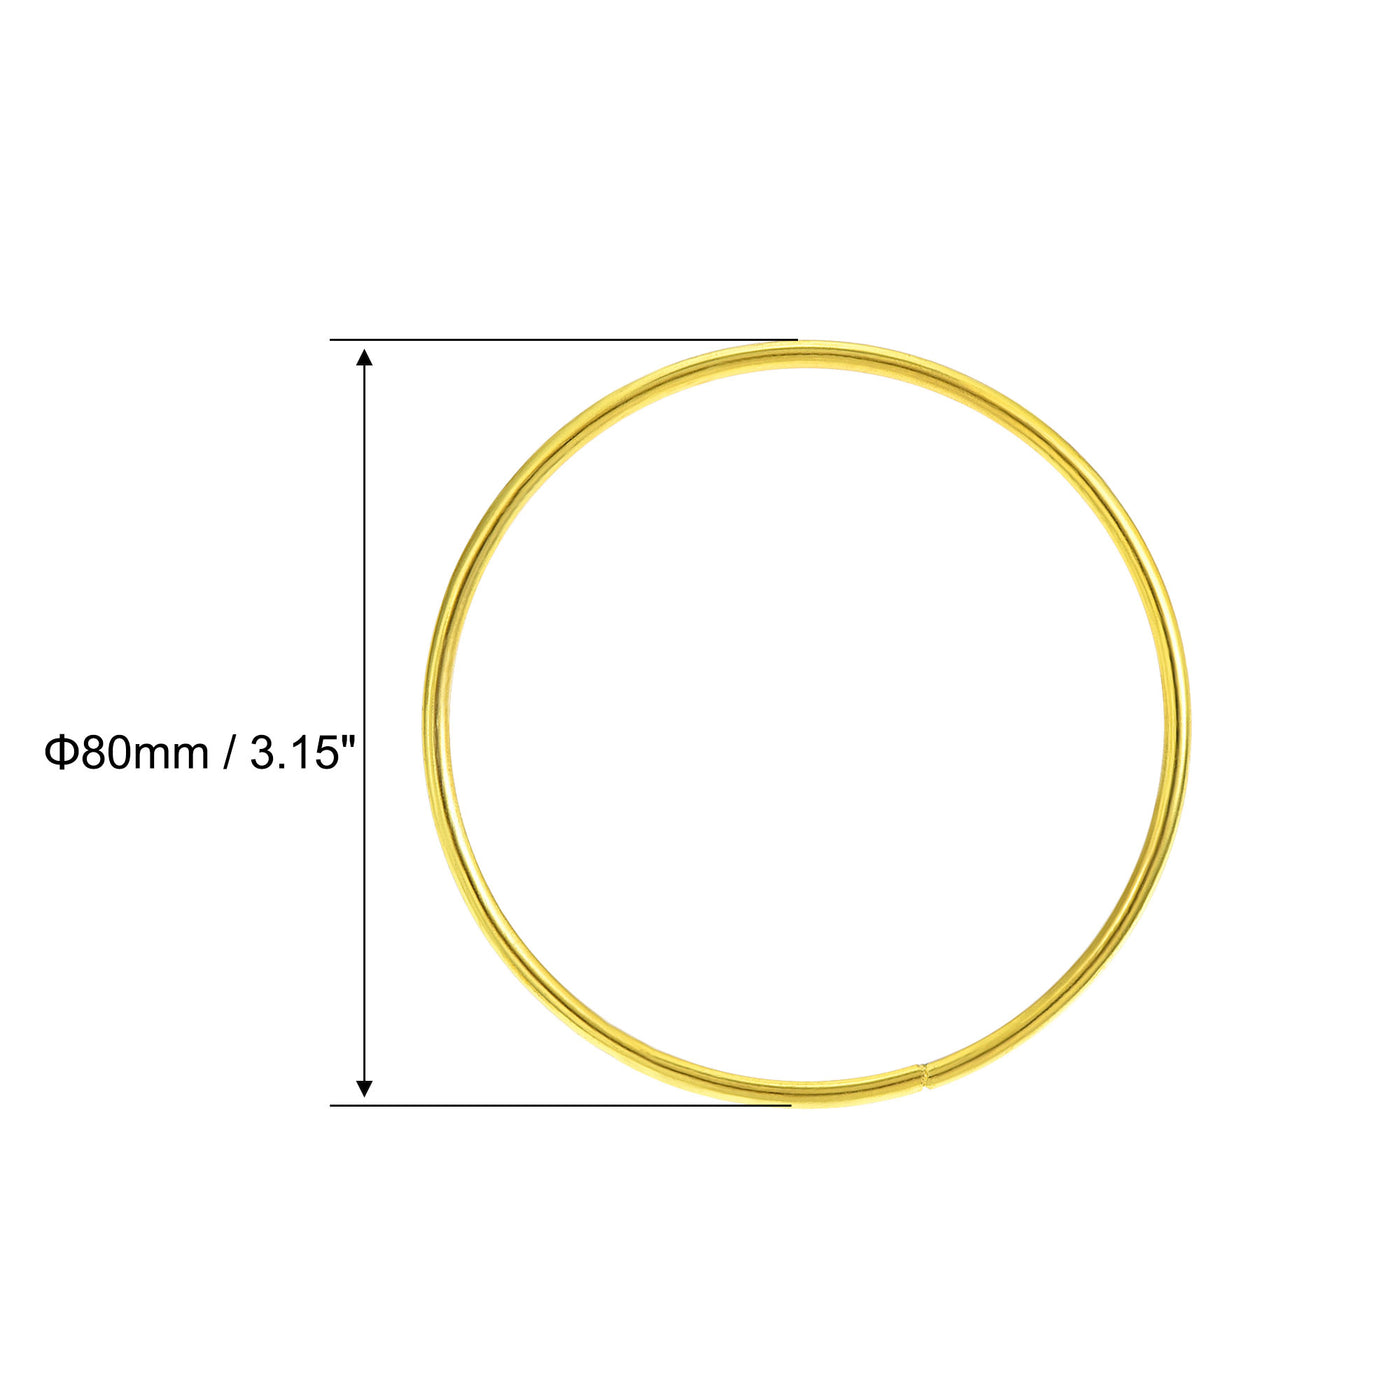 uxcell Uxcell Metal Craft Hoops Rings 80mm(3.15") OD for DIY Wreaths, Macrame Projects 12pcs